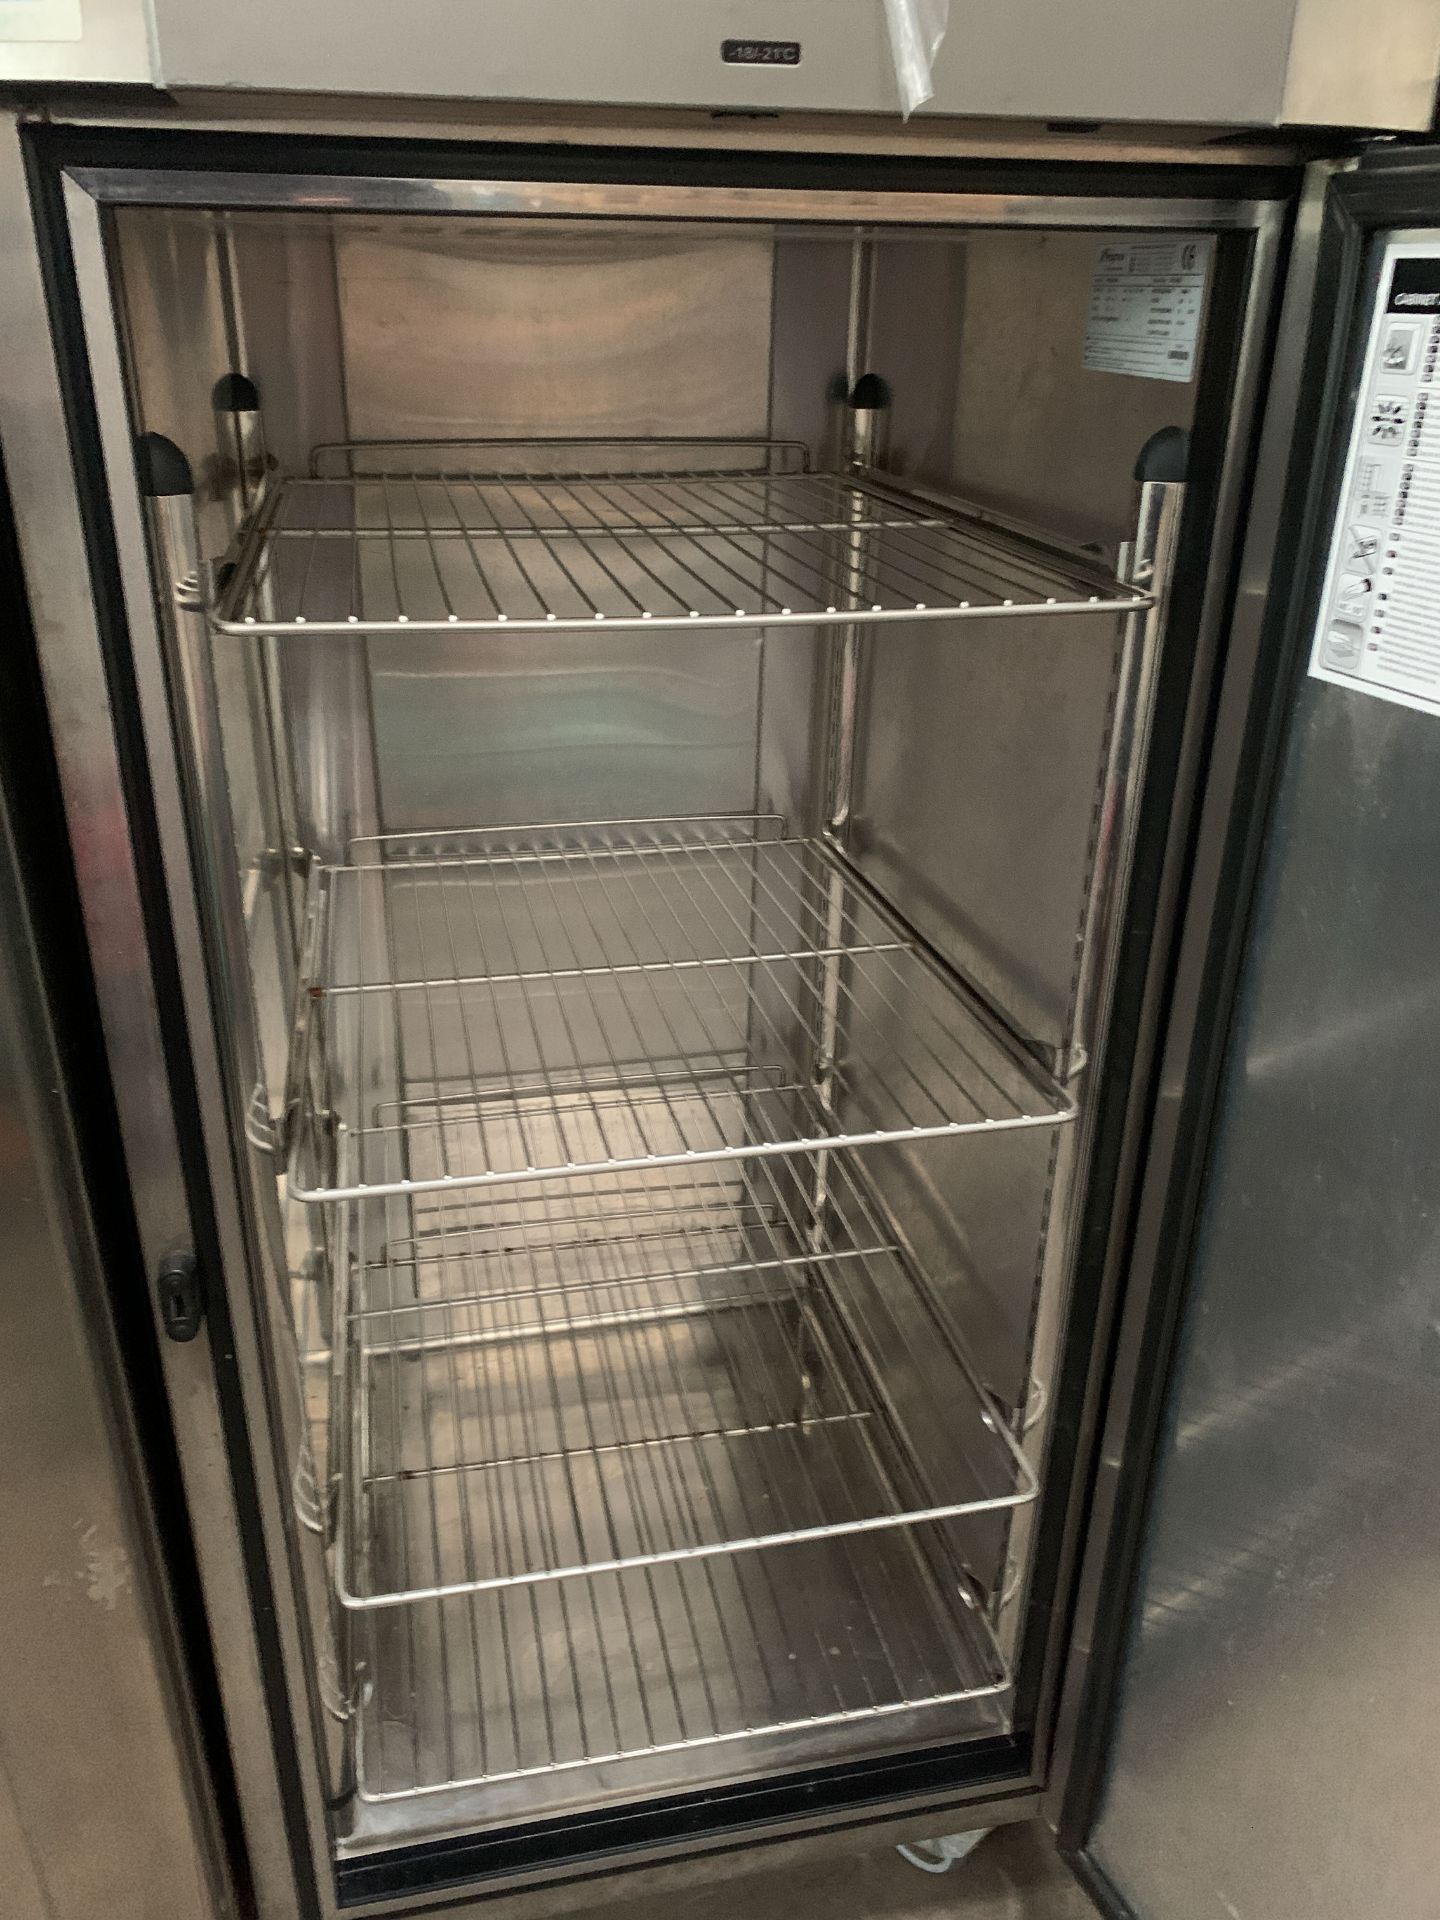 Foster Refrigeration Stainless Steel Commercial Catering Upright Mobile Freezer - Model PREMG500L - Image 2 of 5